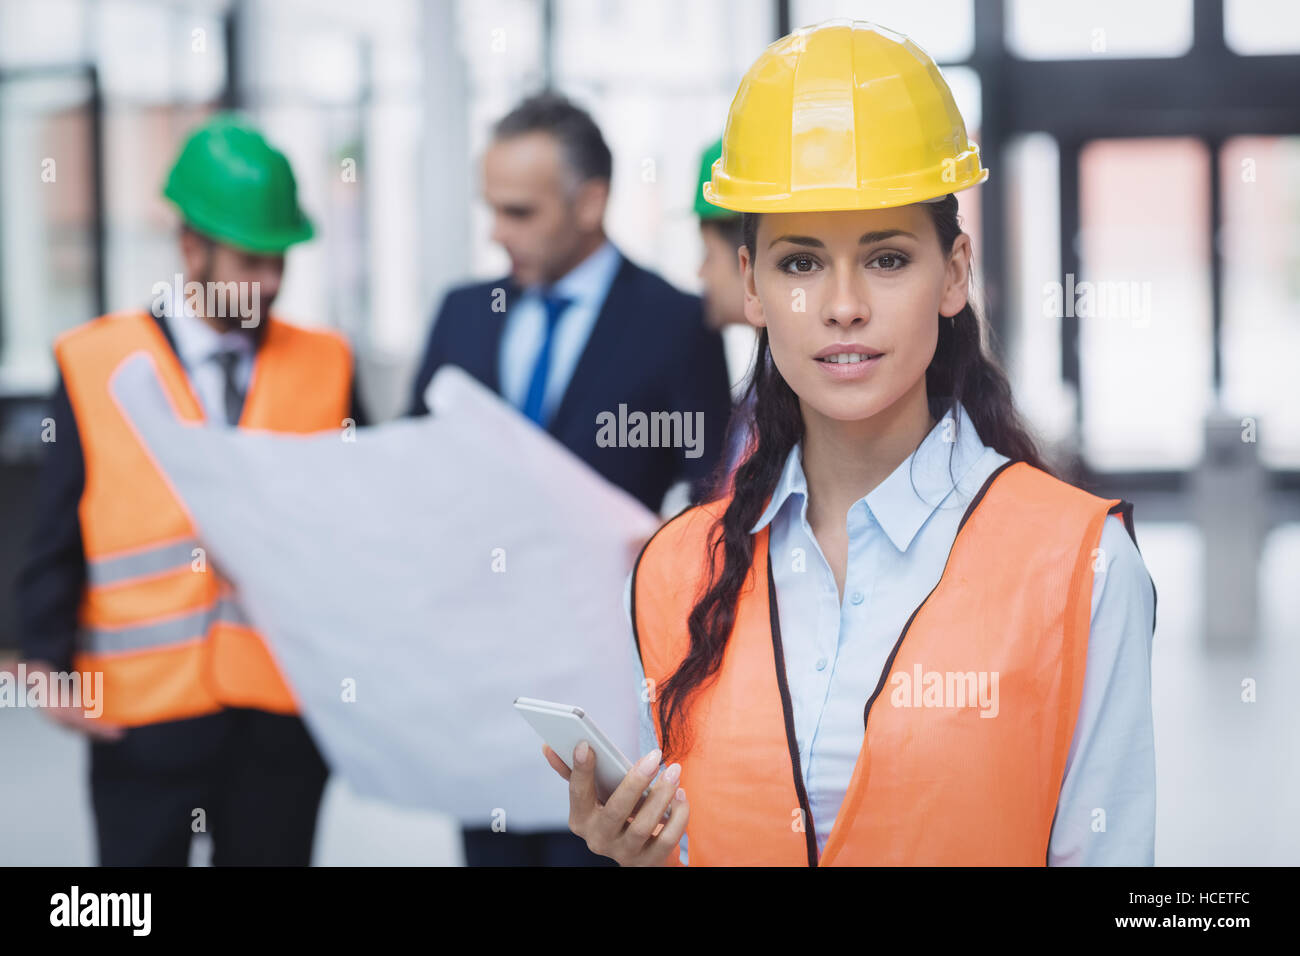 Female architect holding mobile phone Banque D'Images